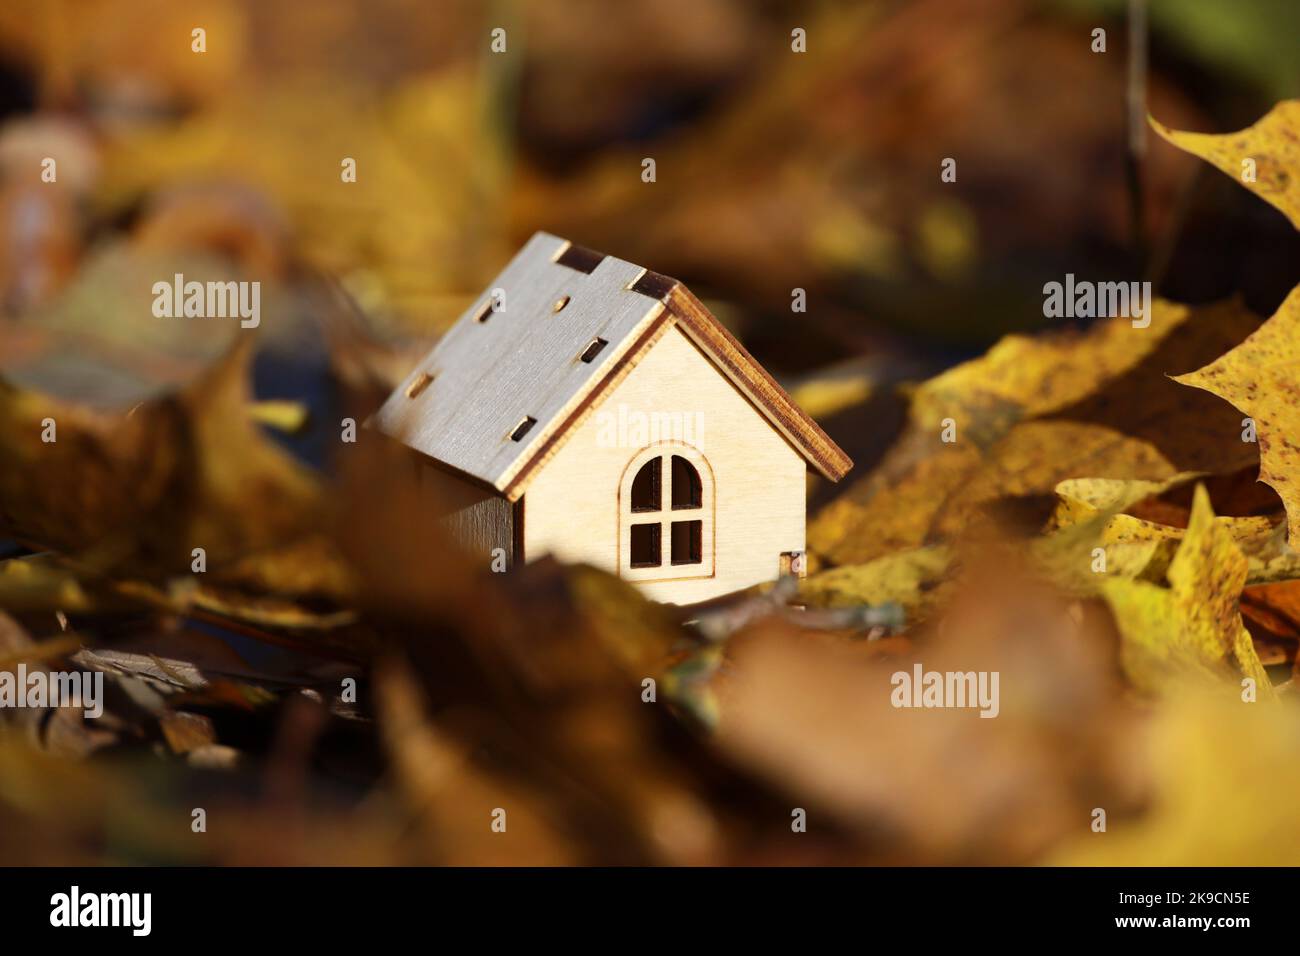 Small wooden house model on maple leaves background. Concept of country cottage, housing search in autumn, real estate in ecologically clean area Stock Photo